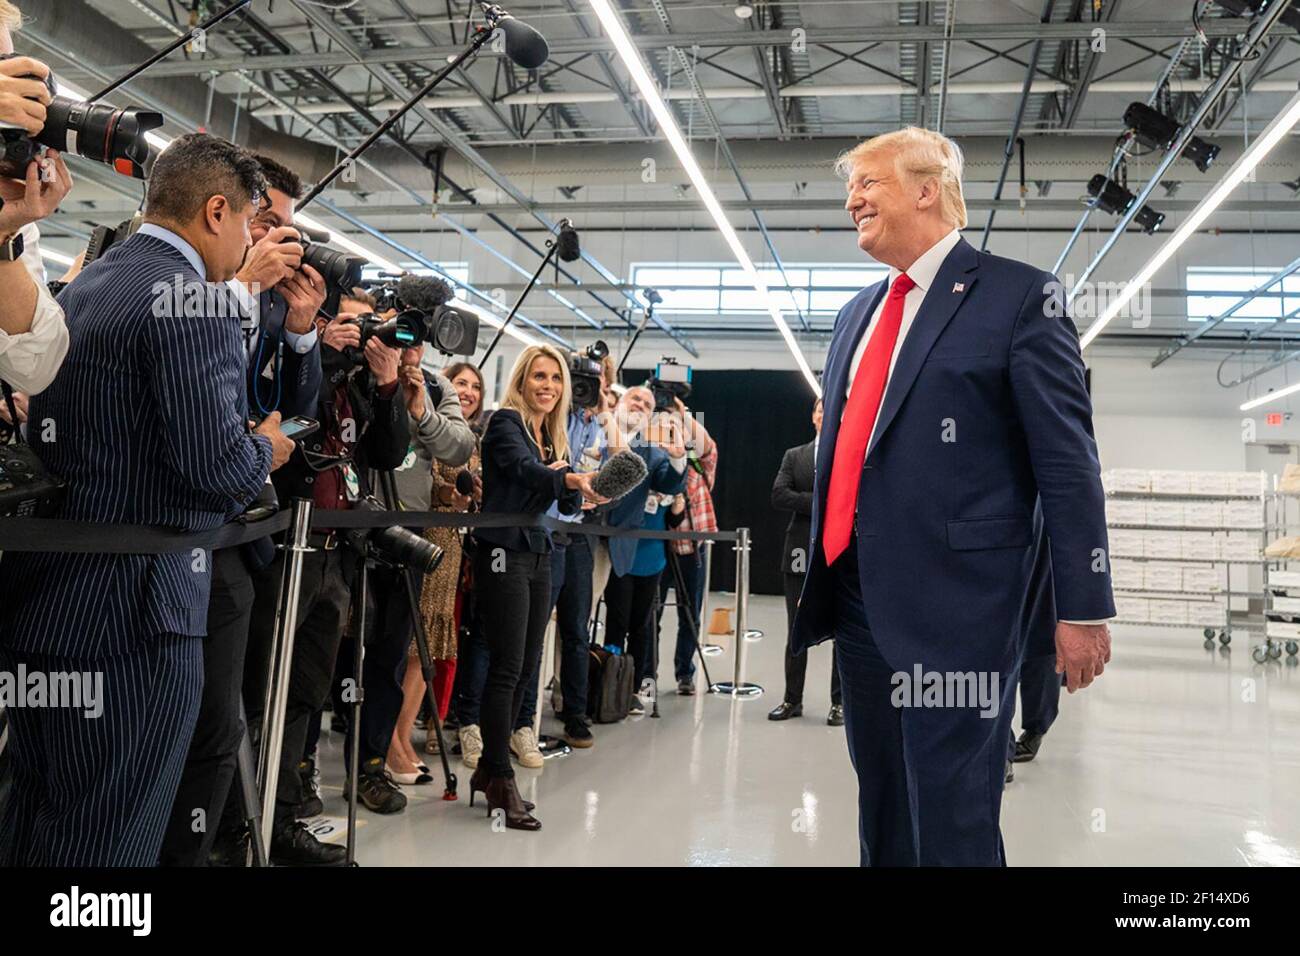 Mann Publications - President Trump joined Bernard Arnault, chairman and  CEO of LVMH, at the opening of the brand's leather goods workshop in  Alvarado, Texas. White house special advisors Ivanka Trump and